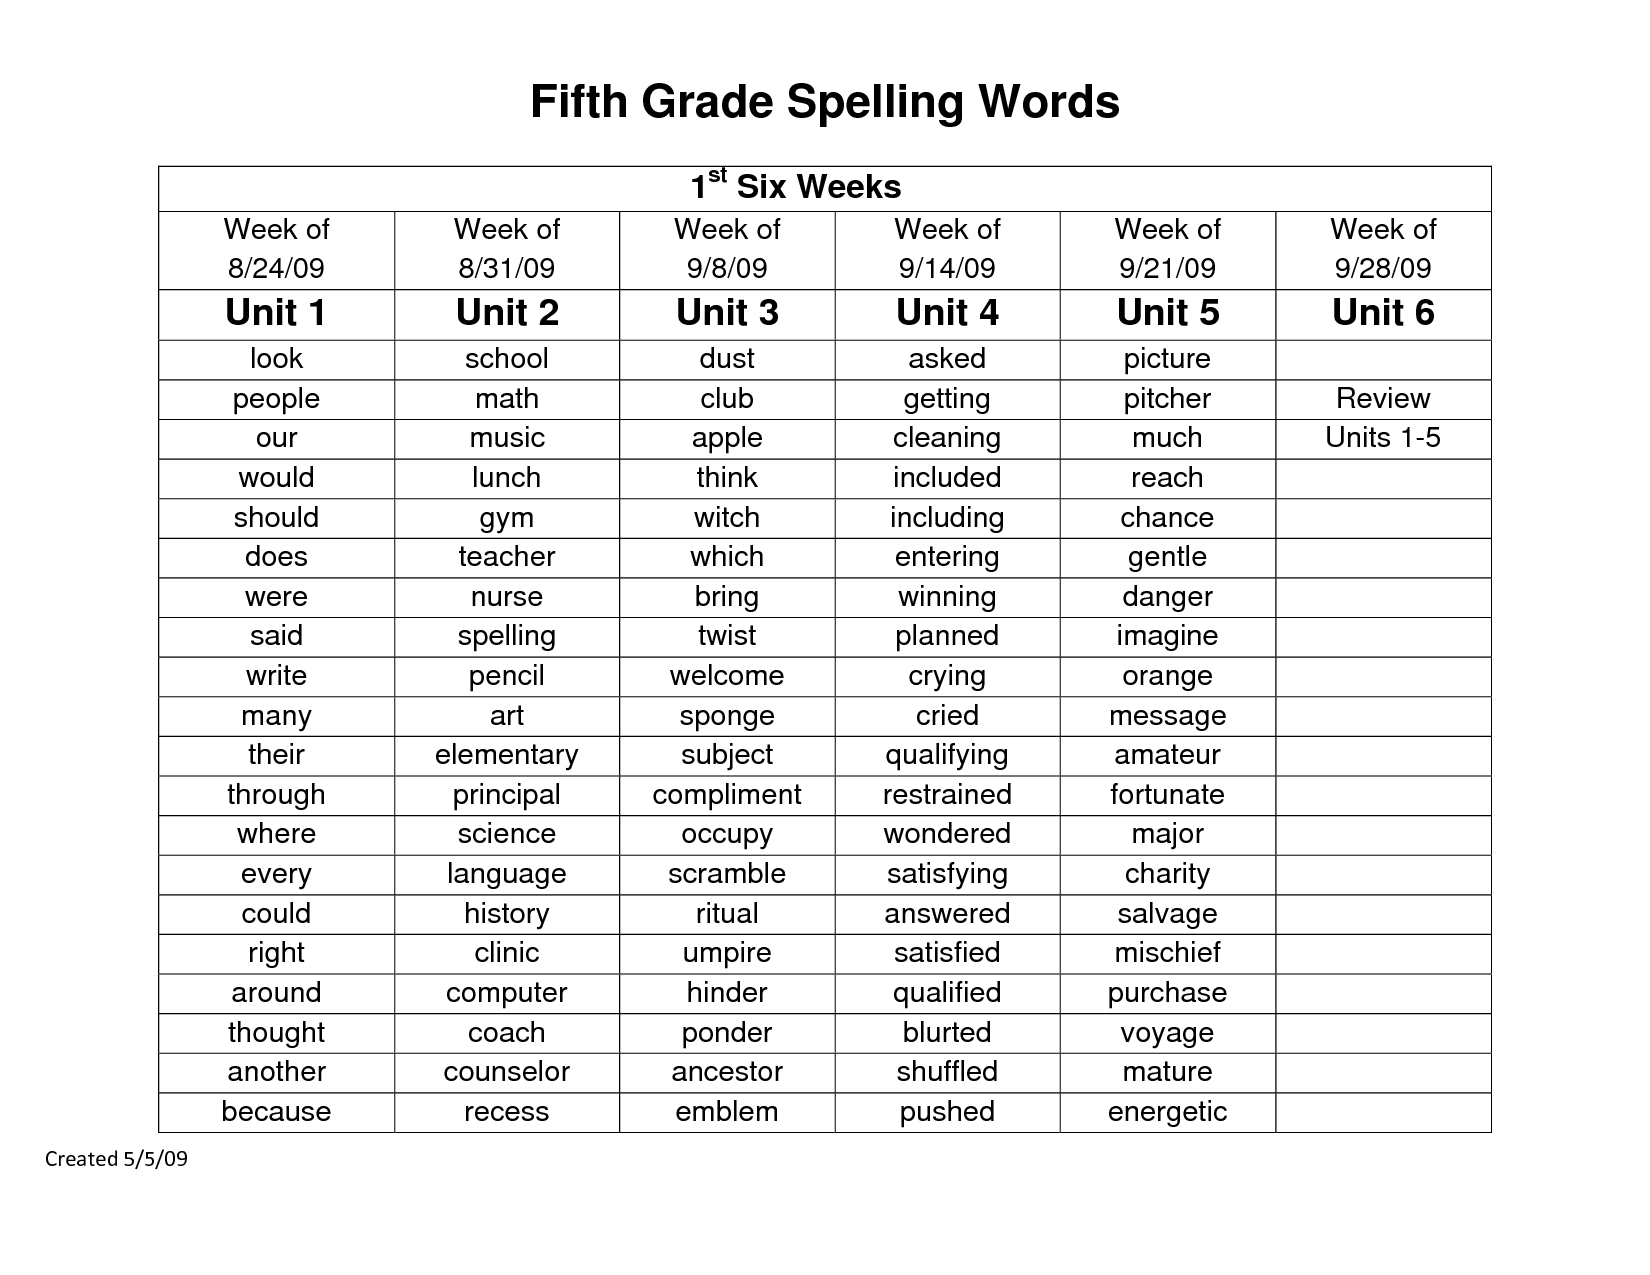 15-best-images-of-5th-grade-reading-vocabulary-worksheets-5th-grade-vocabulary-worksheets-5th